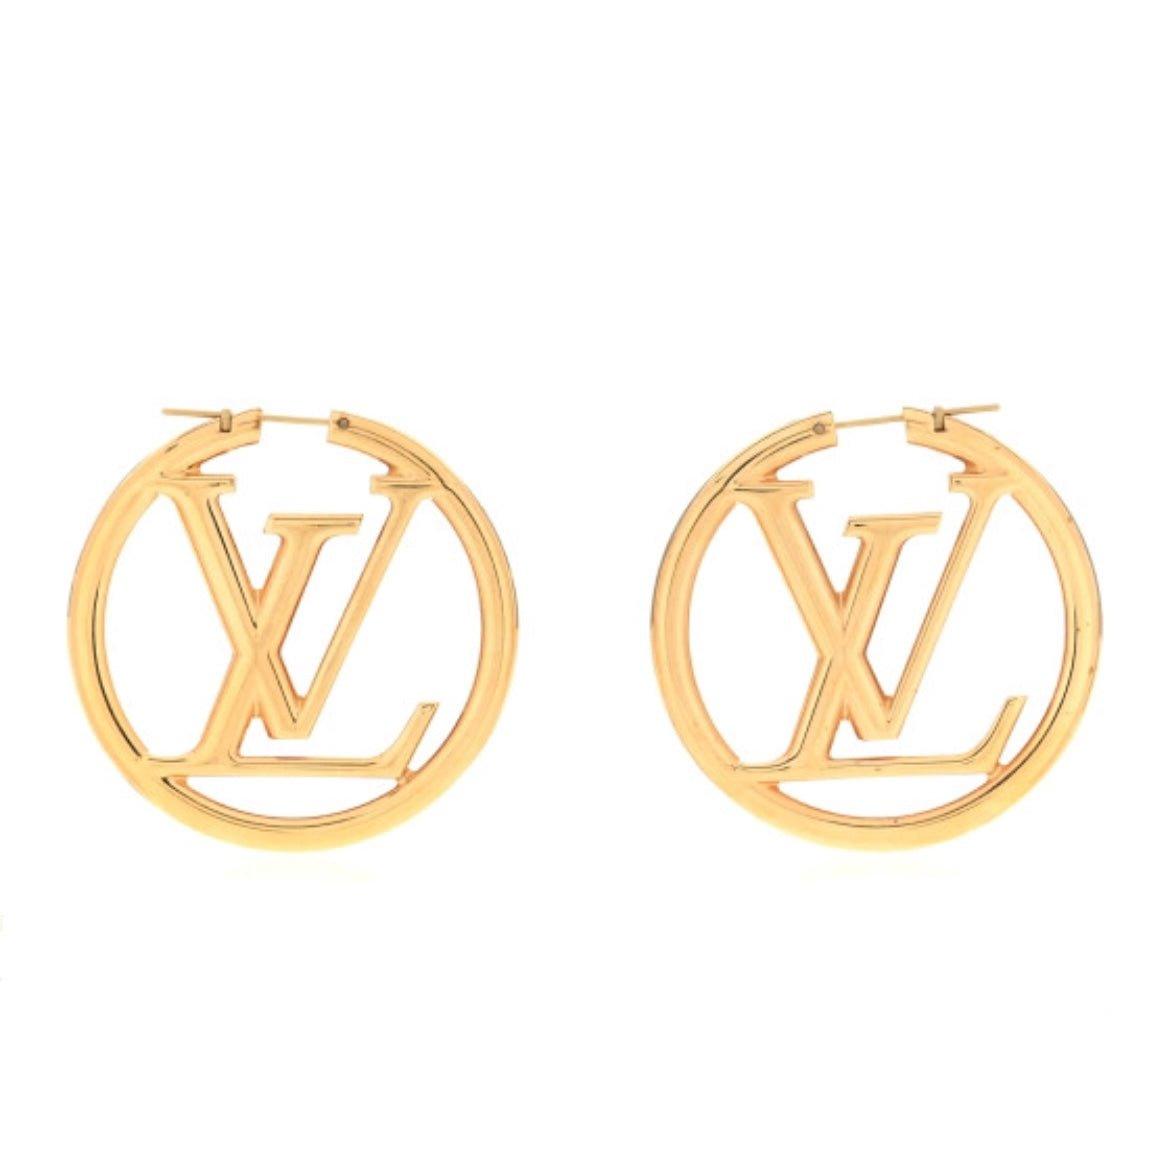 Louis Vuitton, Jewelry, Louis Vuitton Earrings Hoops Brand New Price Firm  As Brand New